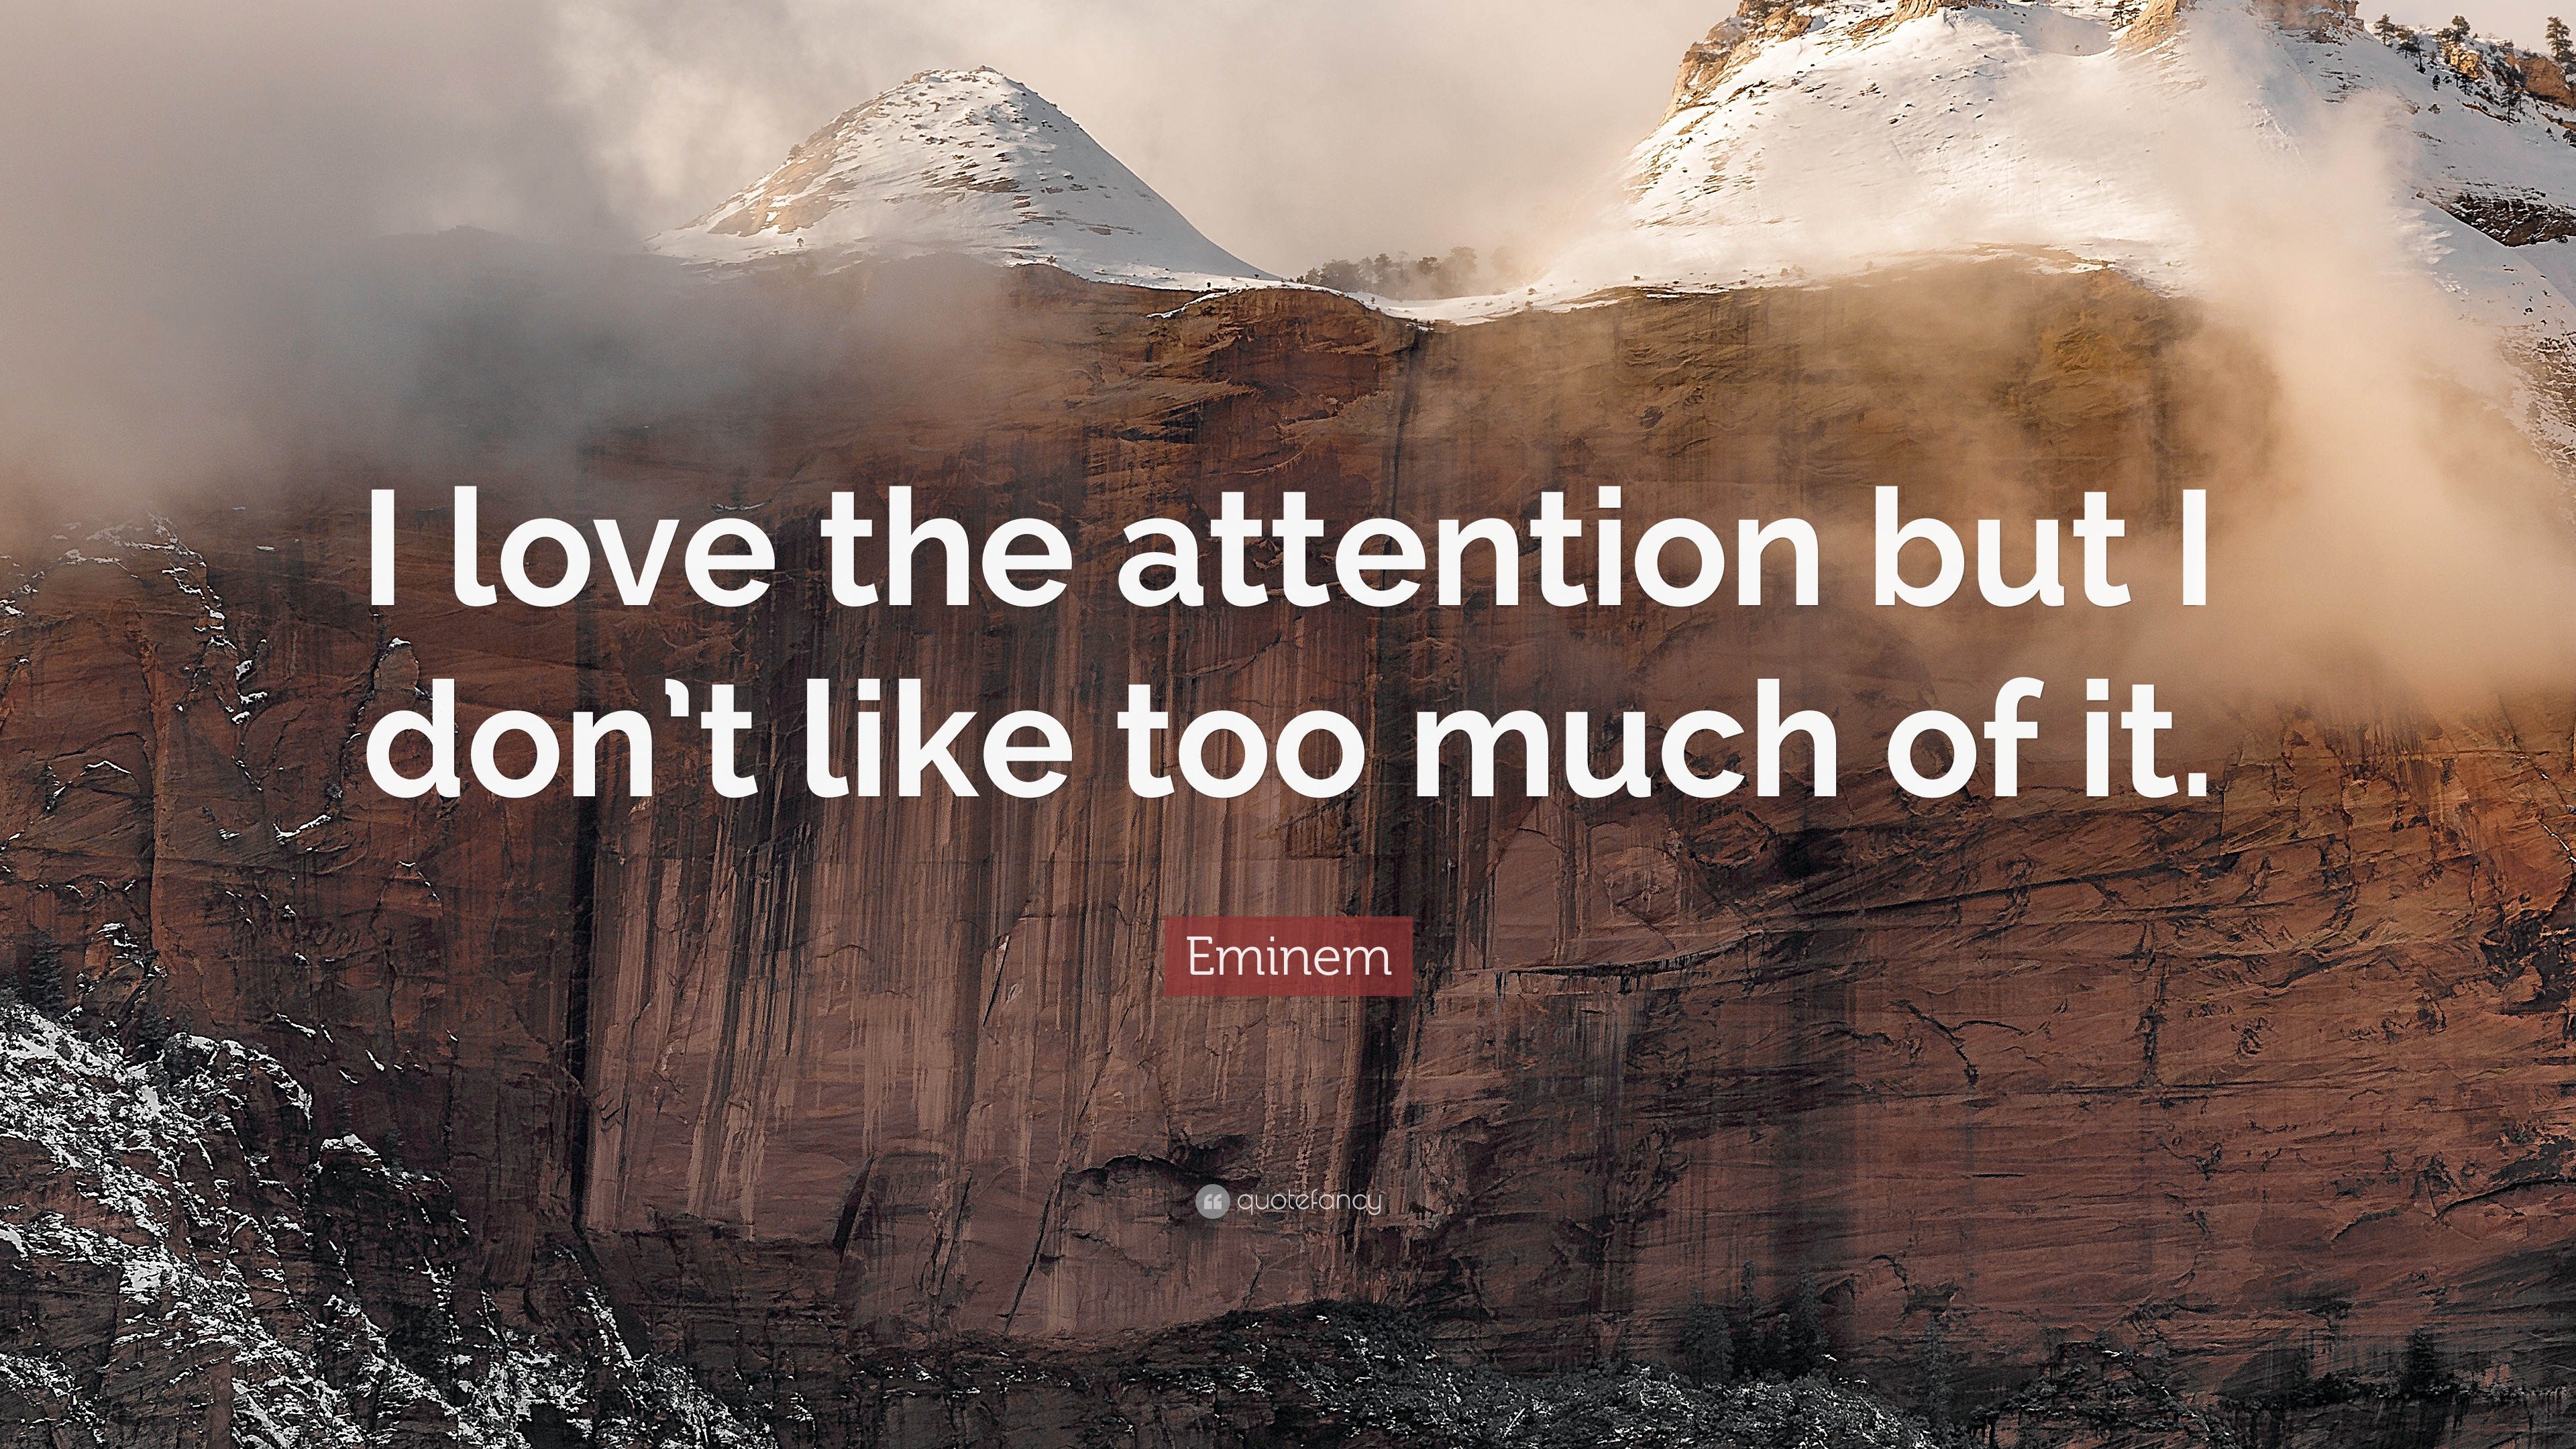 Eminem Quote “I love the attention but I don t like too much